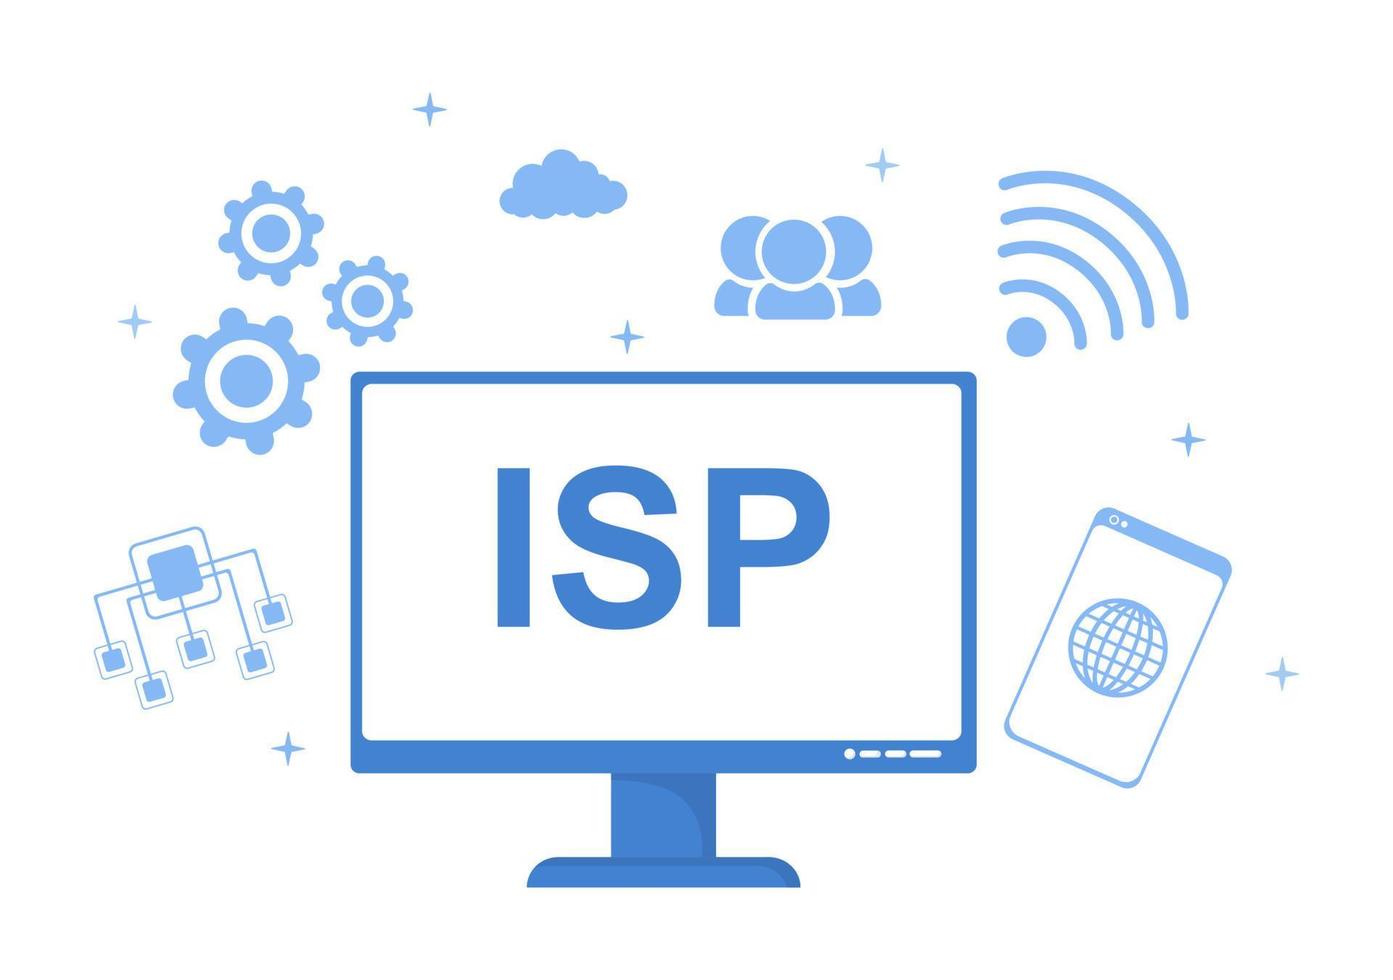 ISP or Internet Service Provider Cartoon Illustration with Keywords and Icons for Intranet Access, Secure Network Connection and Privacy Protection vector